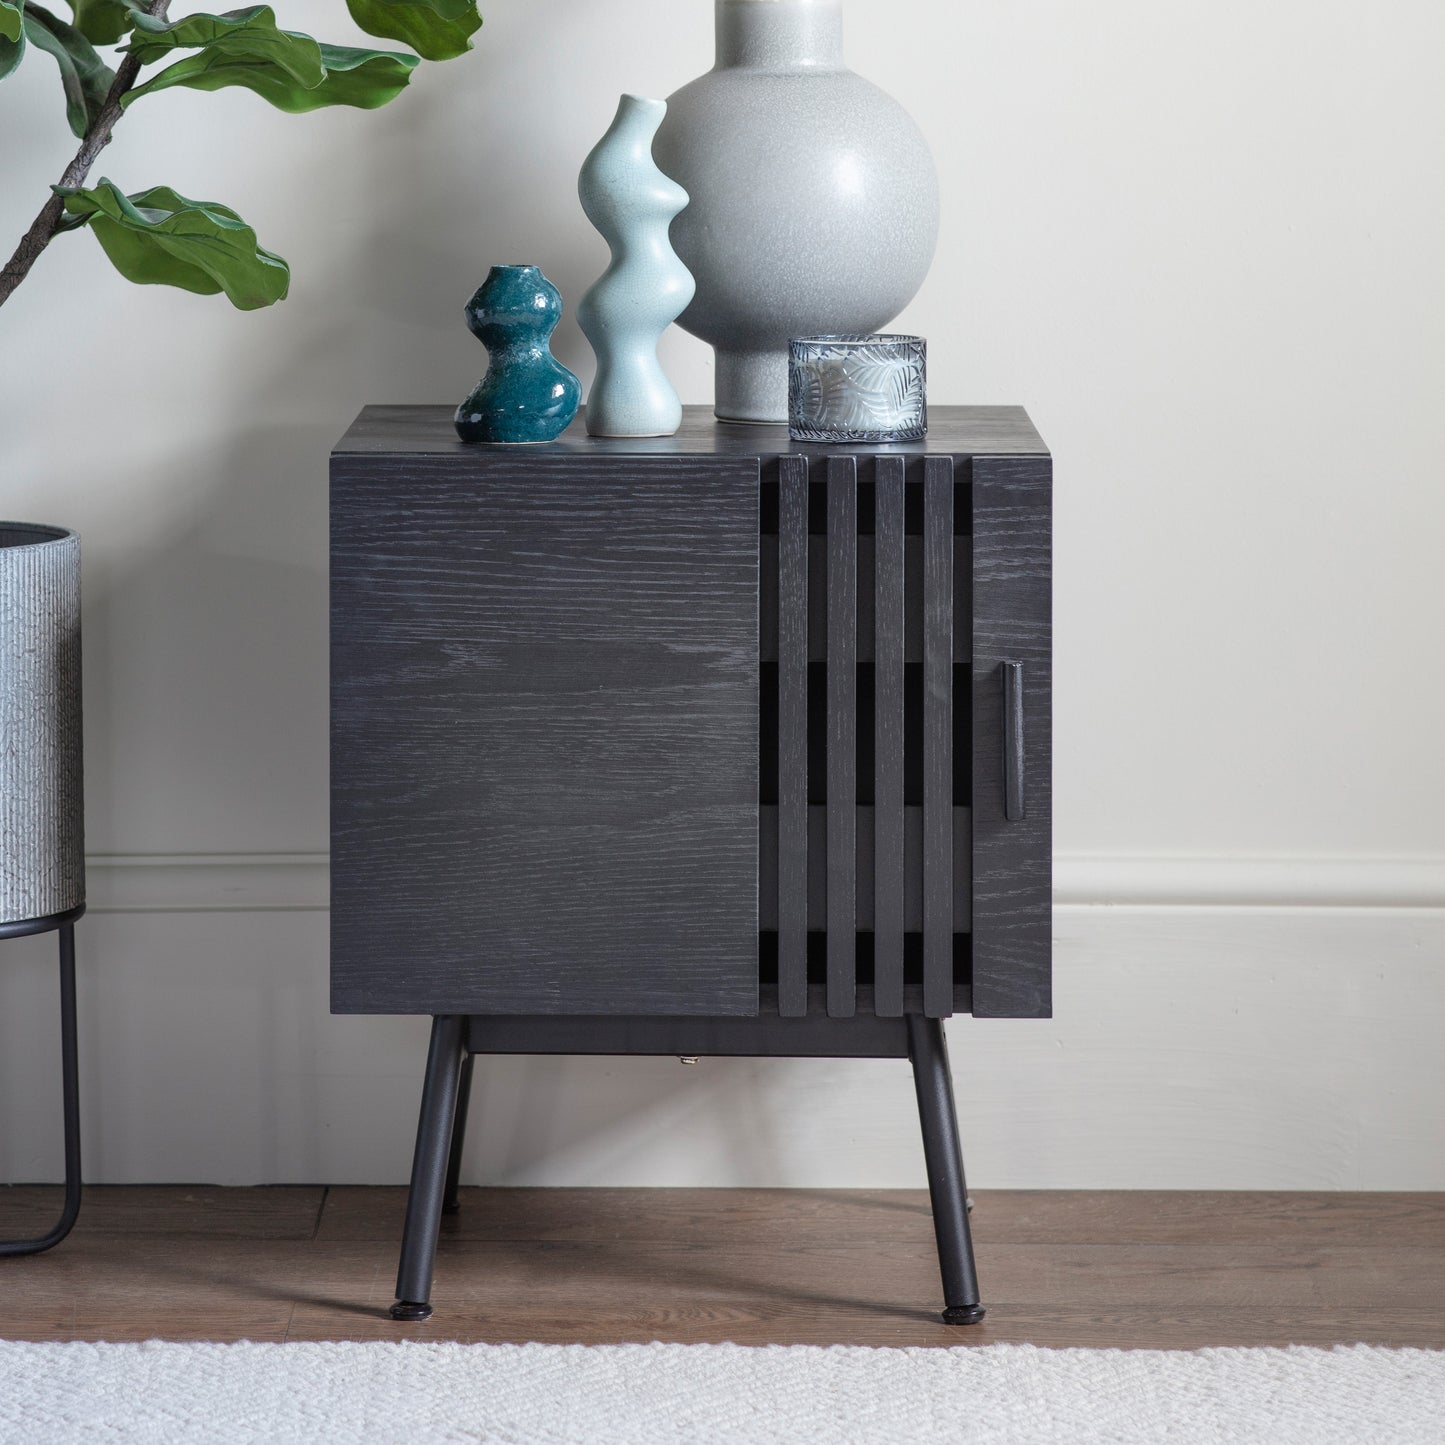 A Black Holston Side Table by Kikiathome.co.uk adding style to your home's interior decor.